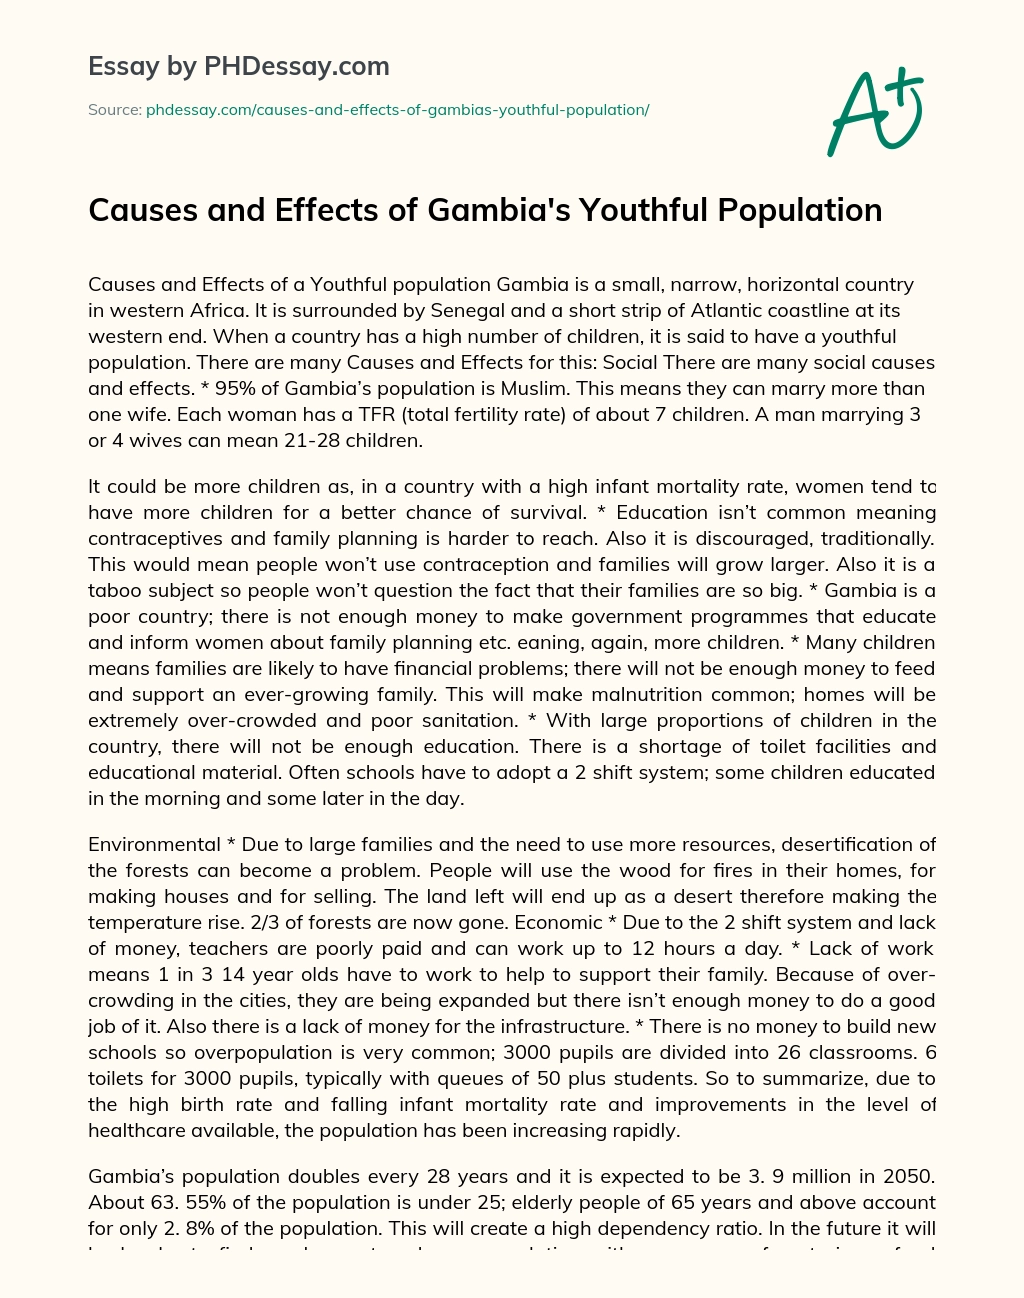 Causes and Effects of Gambia’s Youthful Population essay